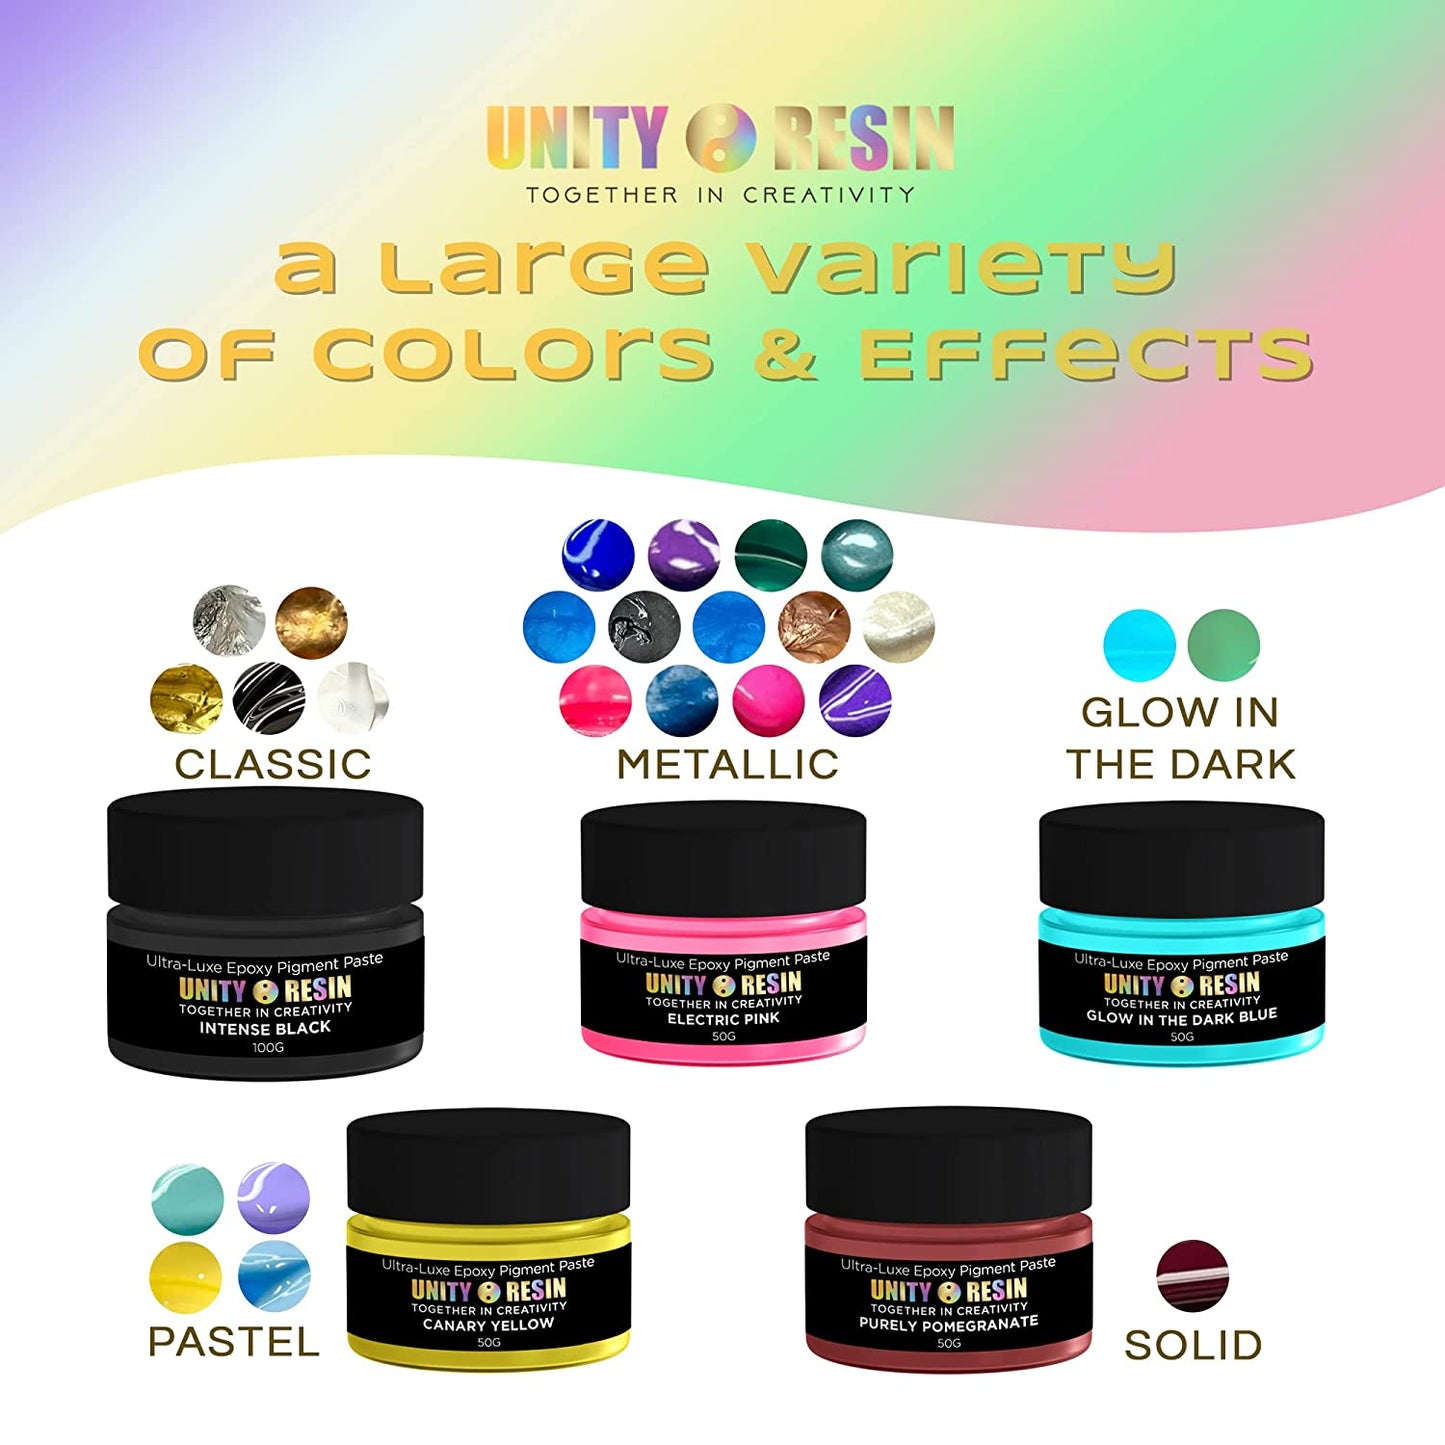 Ultra-Luxe Epoxy Resin Pigment Paste-DAZZLING YELLOW (50G).